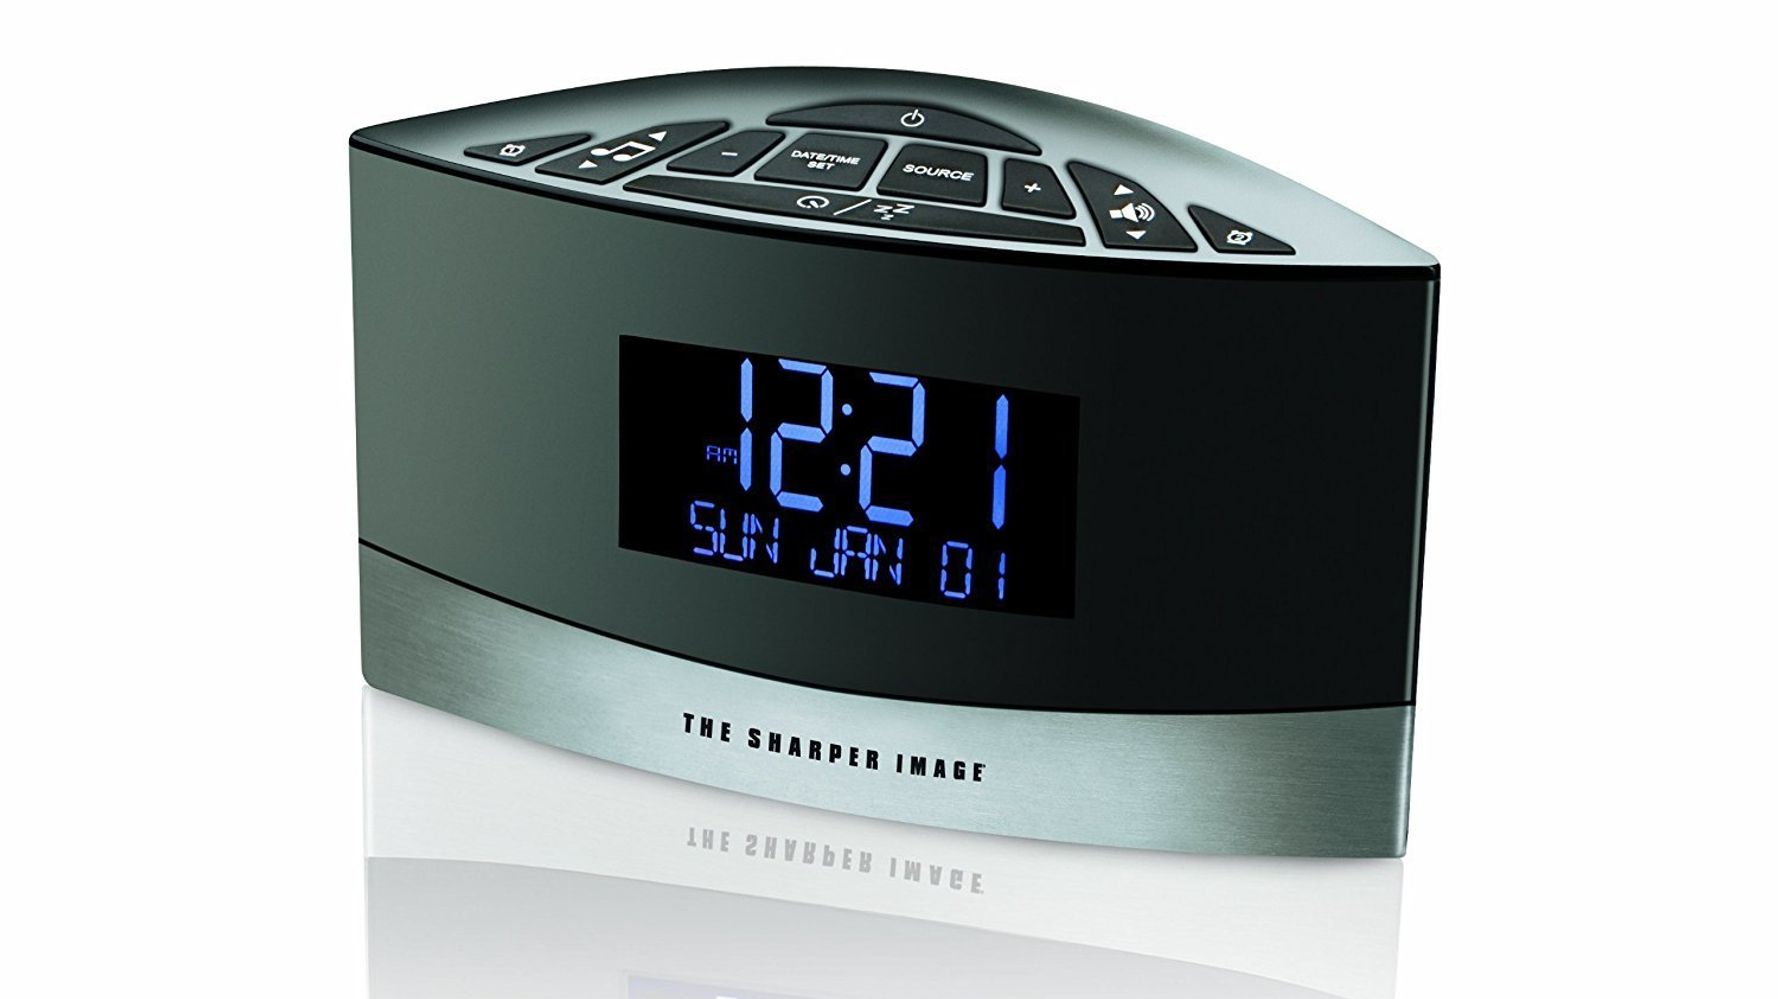 7 Of The Highest Rated Sound Machines With Alarm Clocks On Amazon